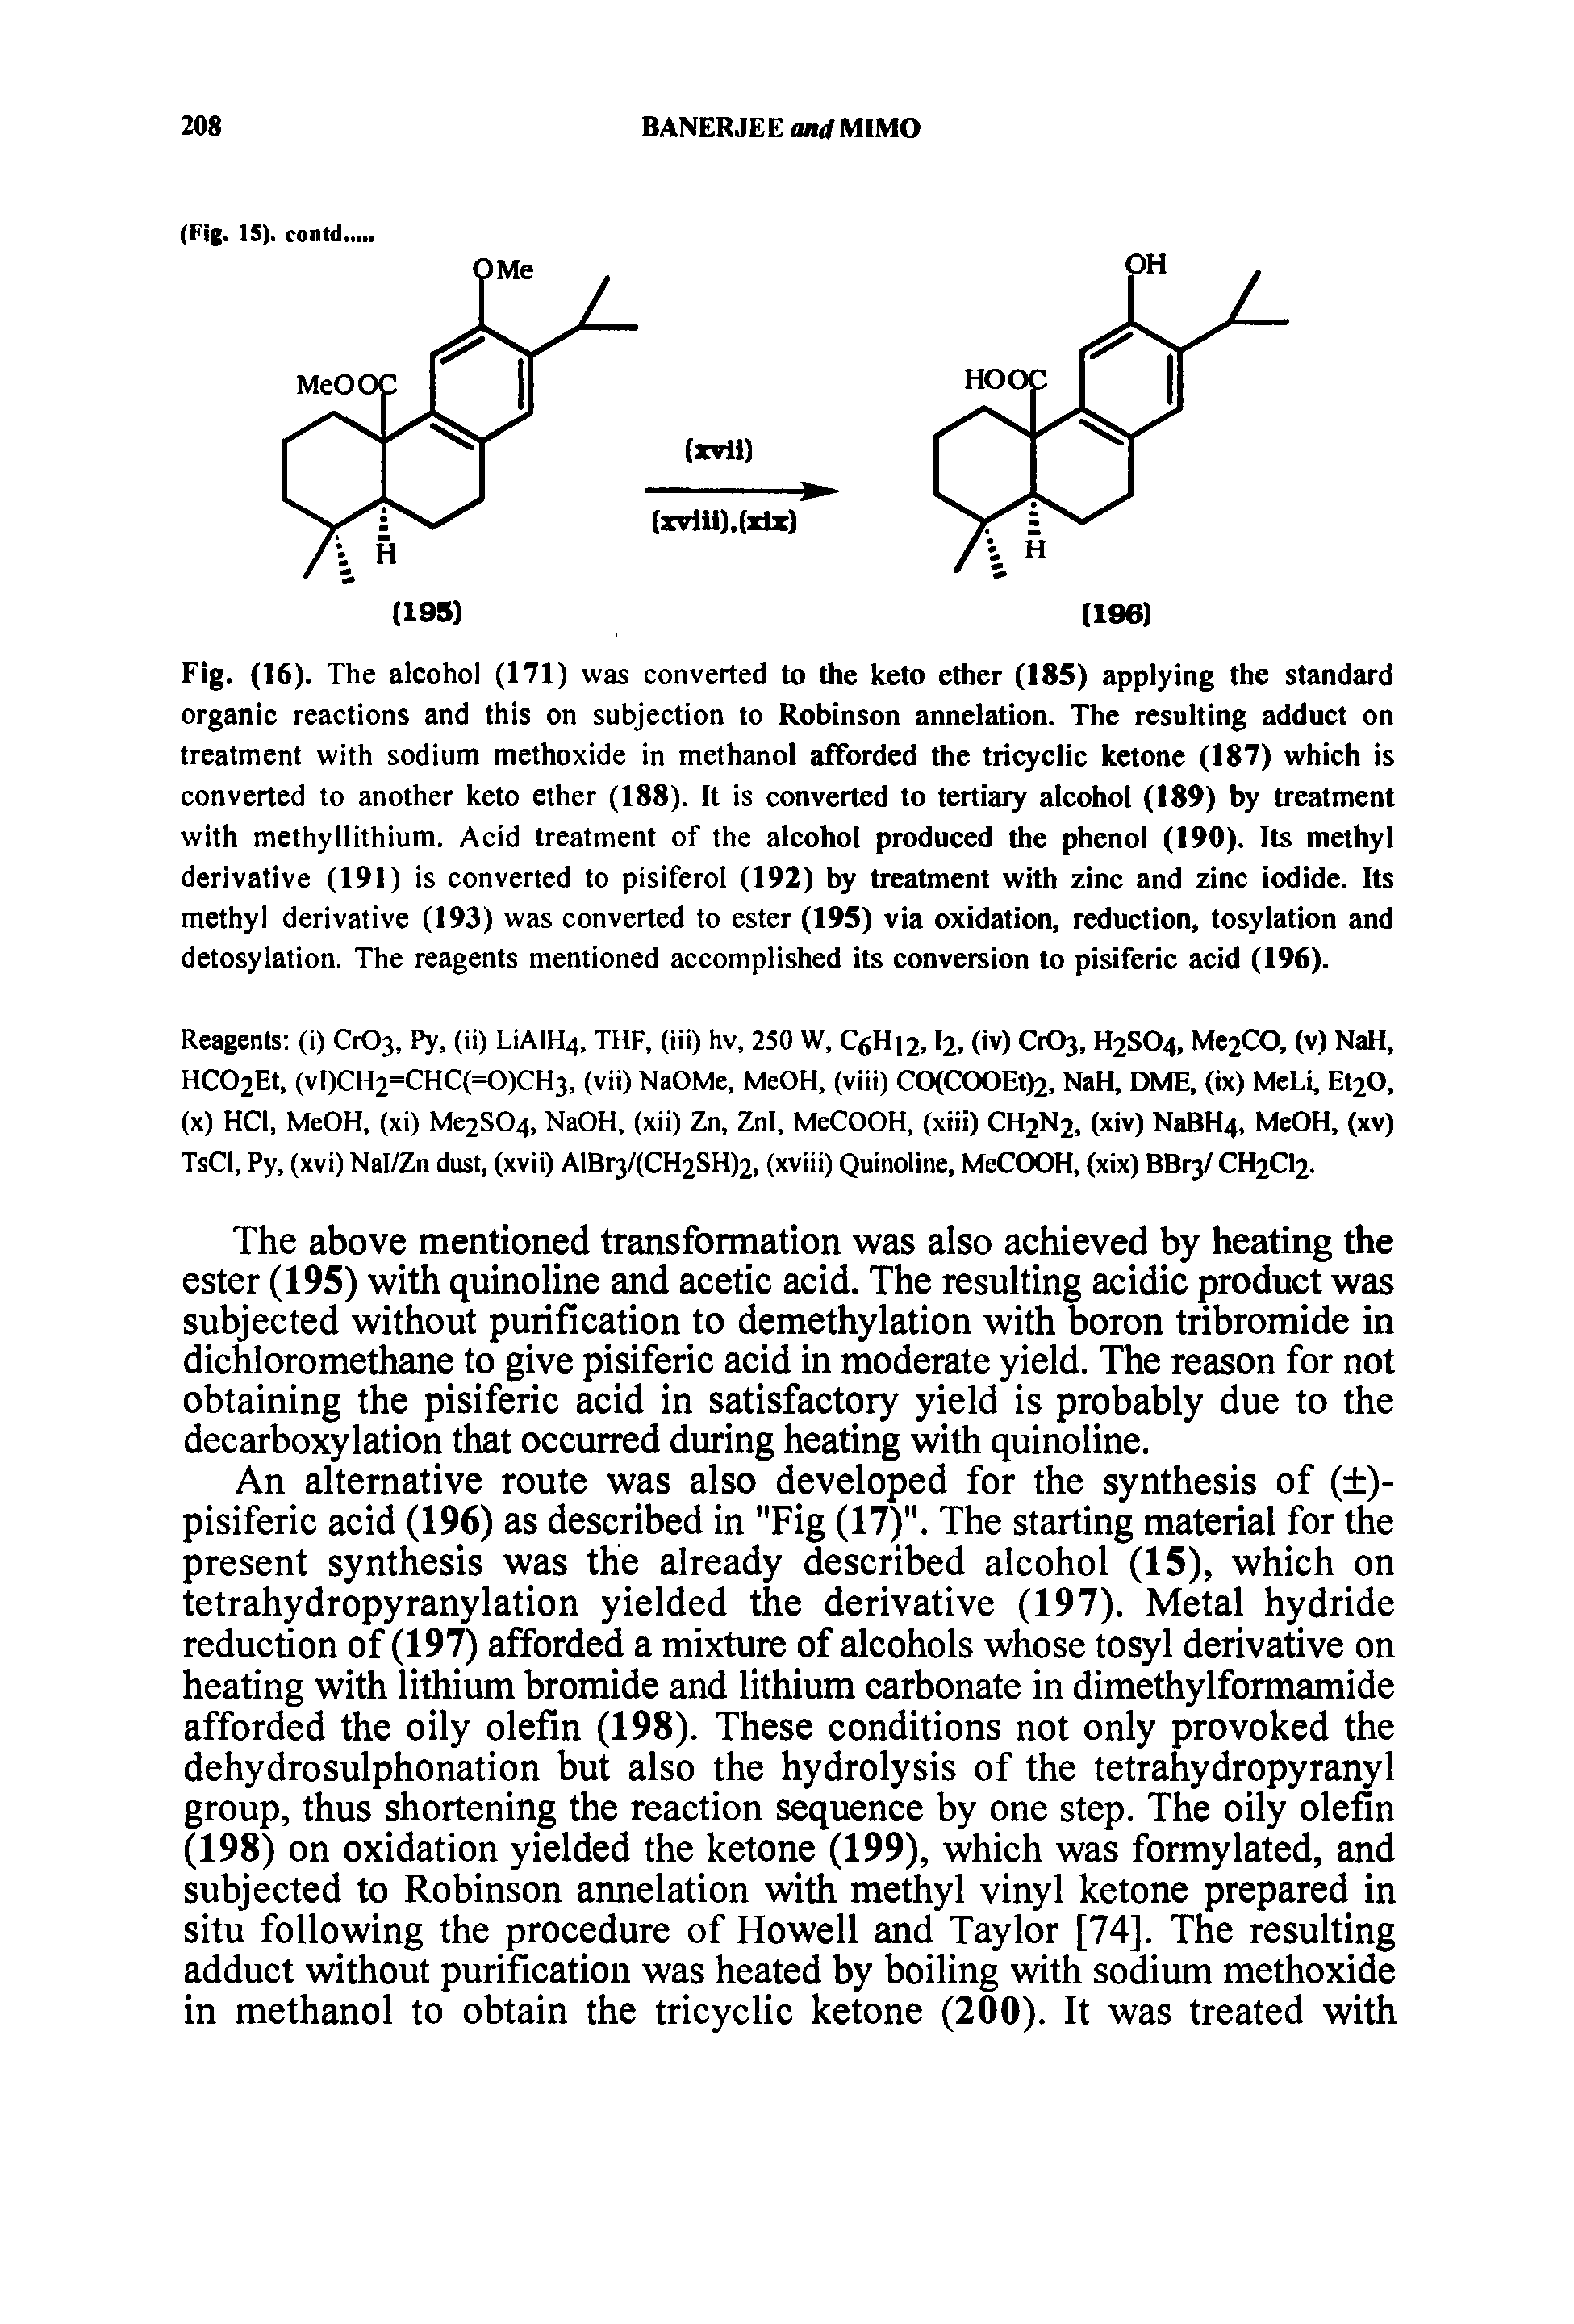 Fig. (16). The alcohol (171) was converted to the keto ether (185) applying the standard organic reactions and this on subjection to Robinson annelation. The resulting adduct on treatment with sodium methoxide in methanol afforded the tricyclic ketone (187) which is converted to another keto ether (188). It is converted to tertiary alcohol (189) by treatment with methyllithium. Acid treatment of the alcohol produced the phenol (190). Its methyl derivative (191) is converted to pisiferol (192) by treatment with zinc and zinc iodide. Its methyl derivative (193) was converted to ester (195) via oxidation, reduction, tosylation and detosylation. The reagents mentioned accomplished its conversion to pisiferic acid (196).